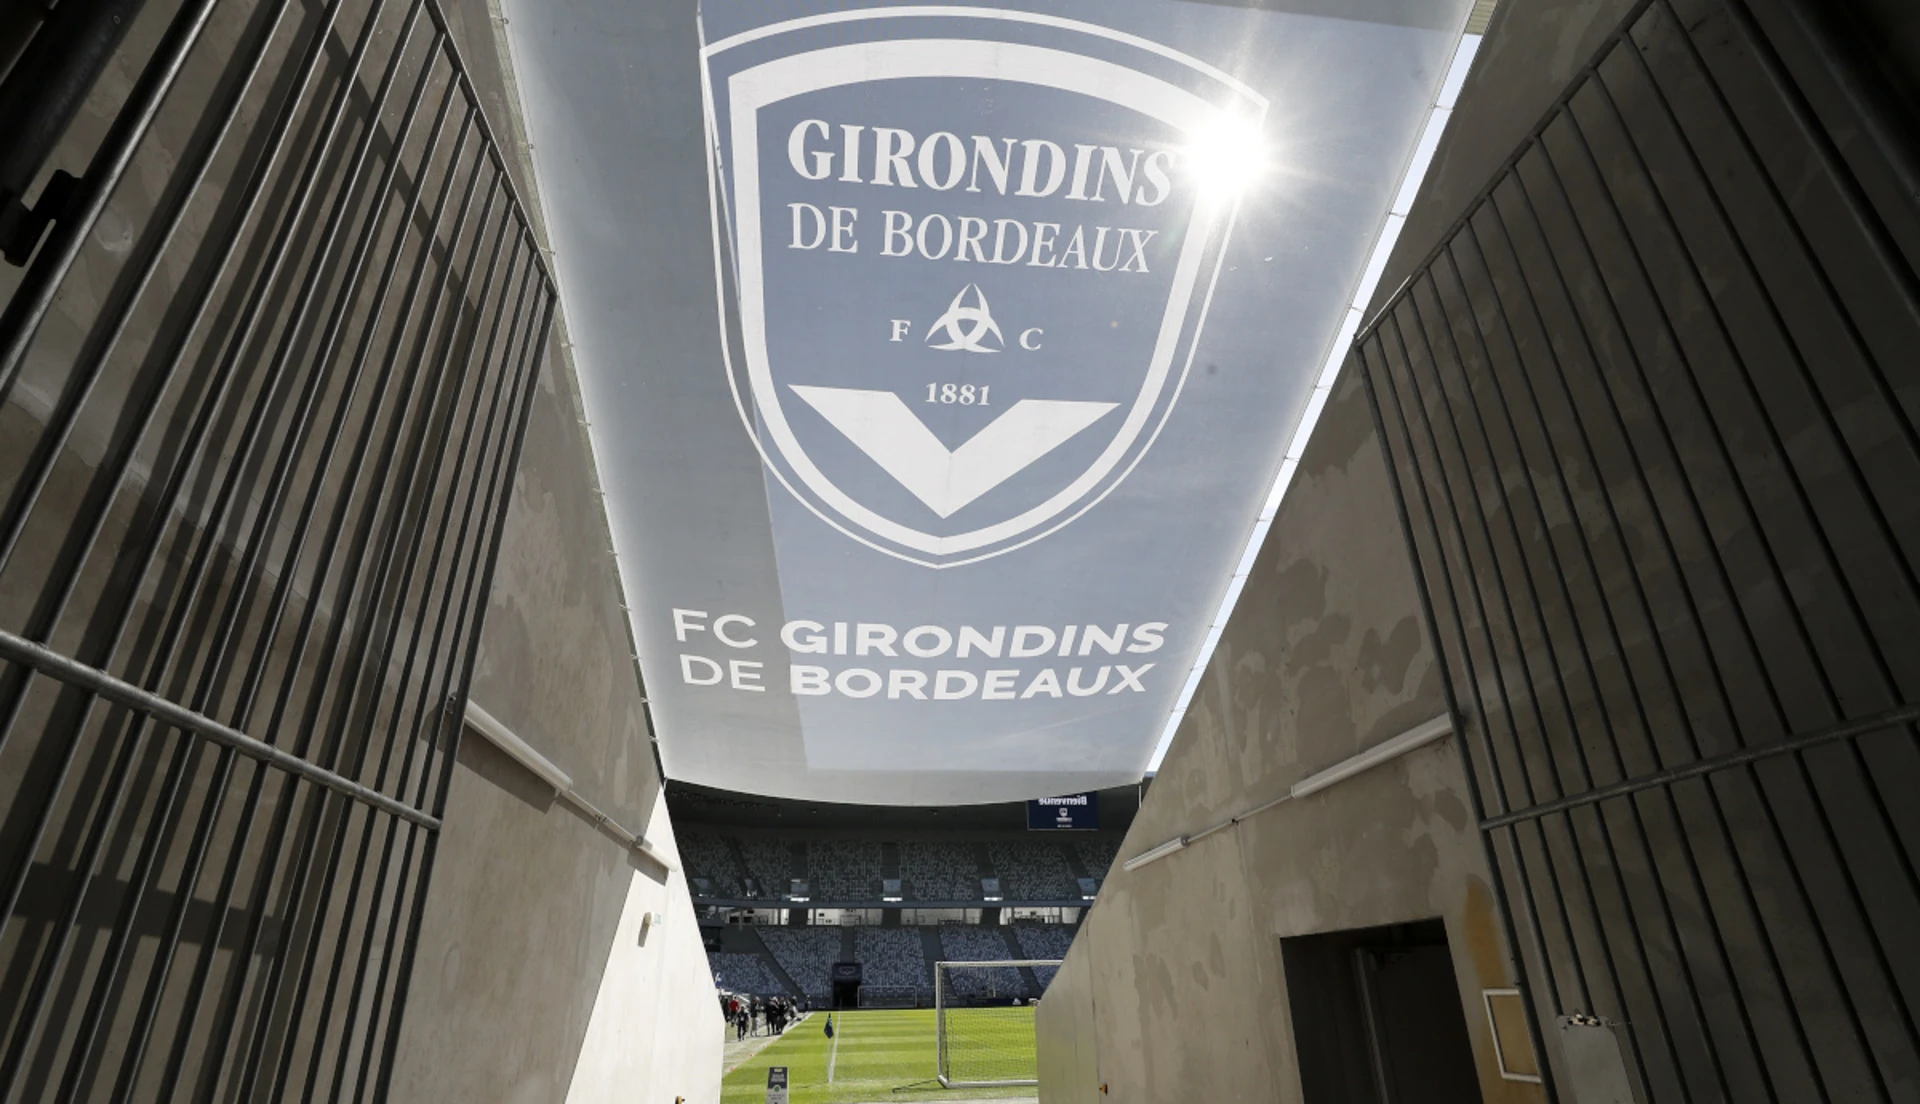 Liverpool owners pull out of talks to buy troubled Bordeaux